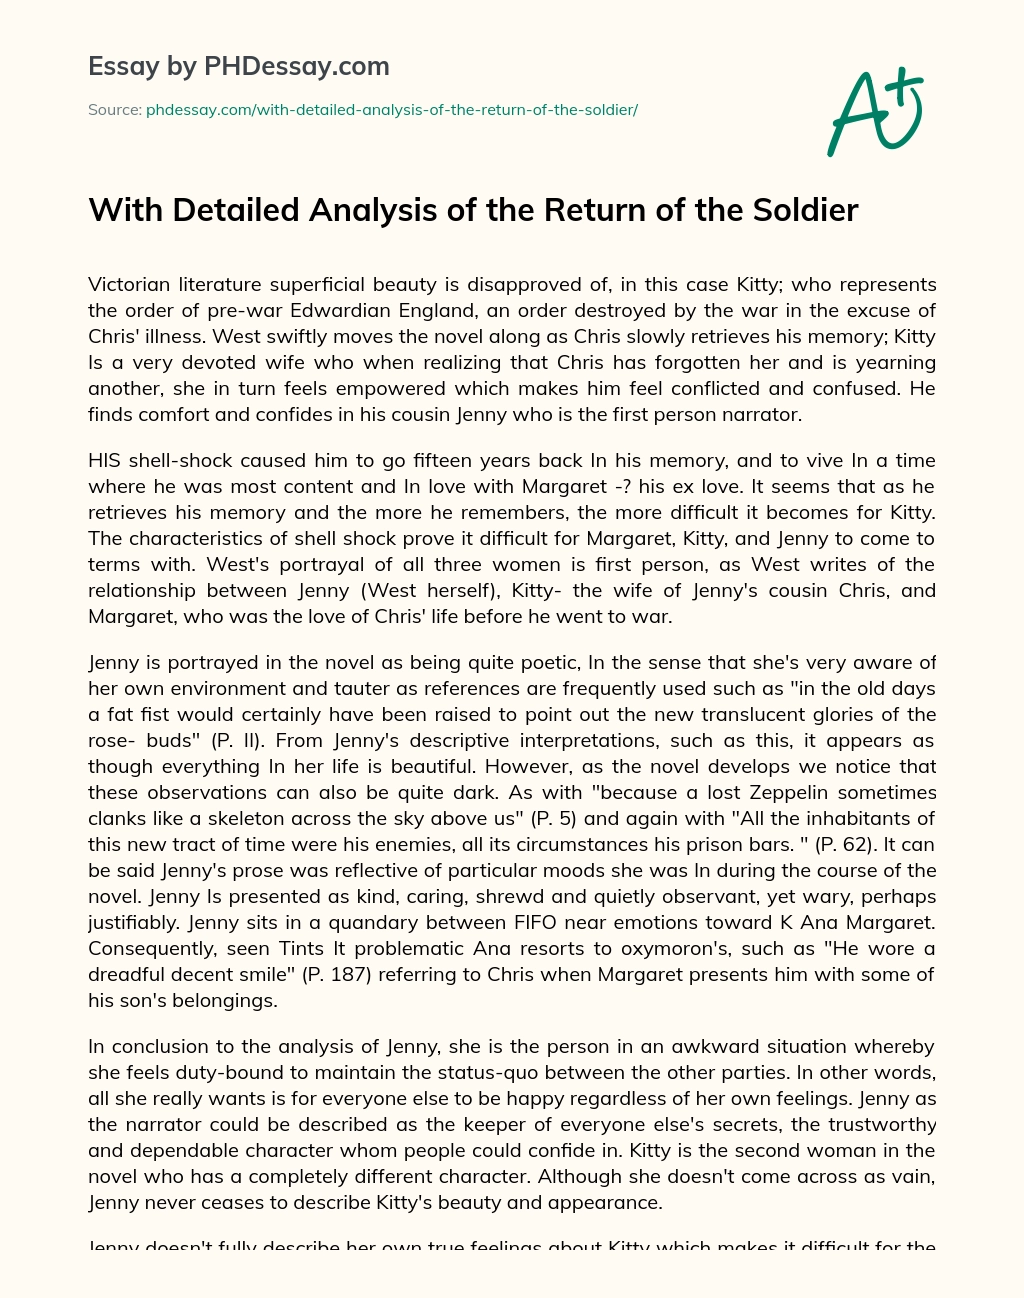 With Detailed Analysis of the Return of the Soldier essay